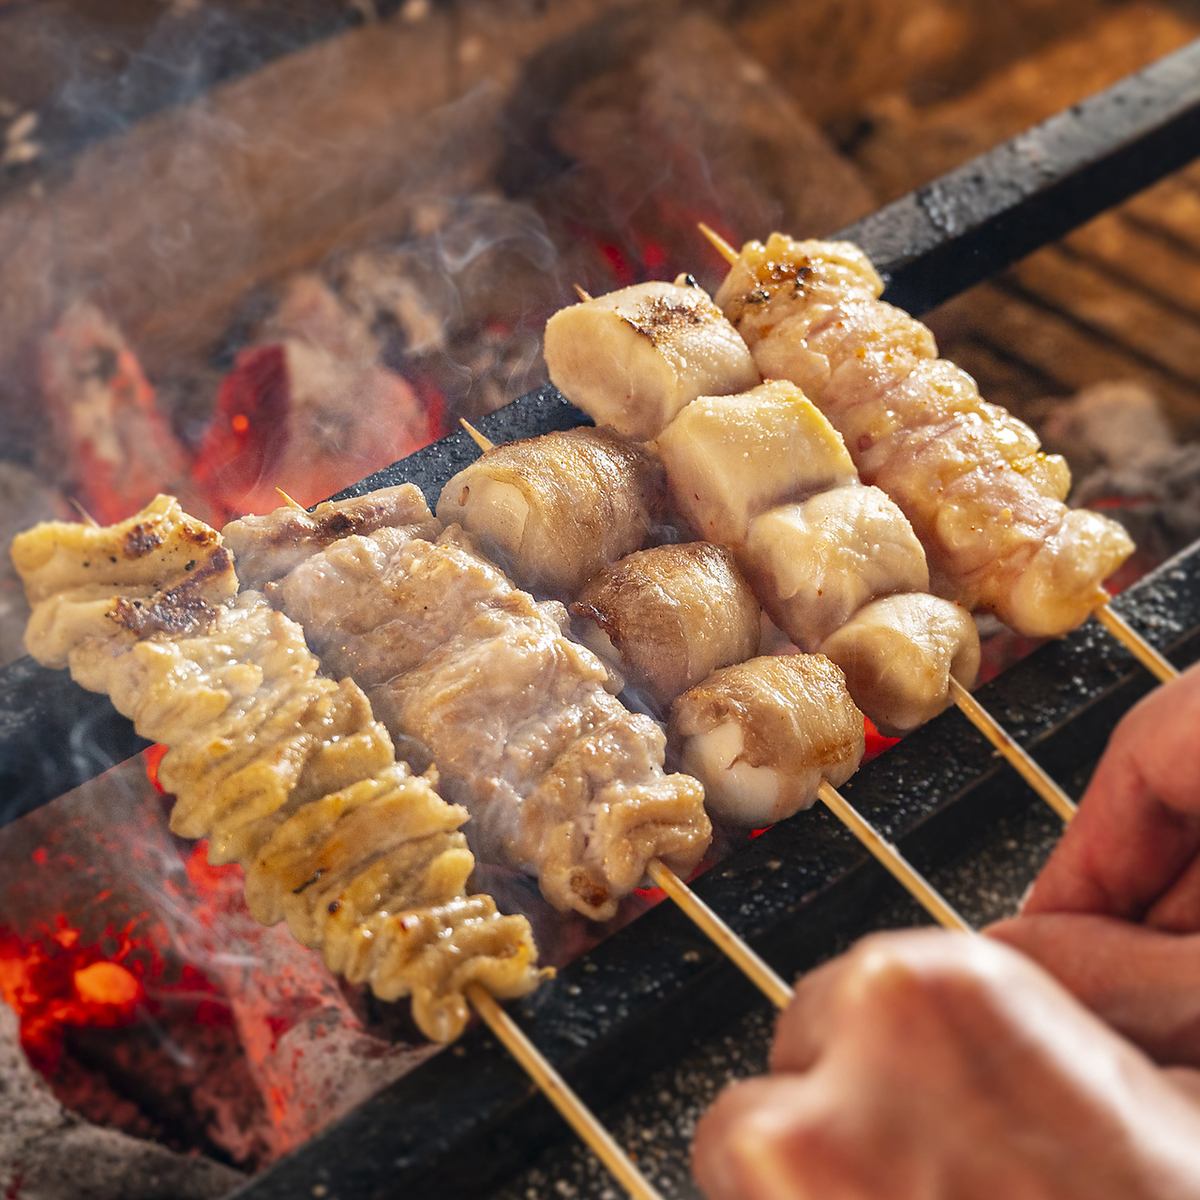 All-you-can-eat skewers, yakitori, and vegetable rolls!